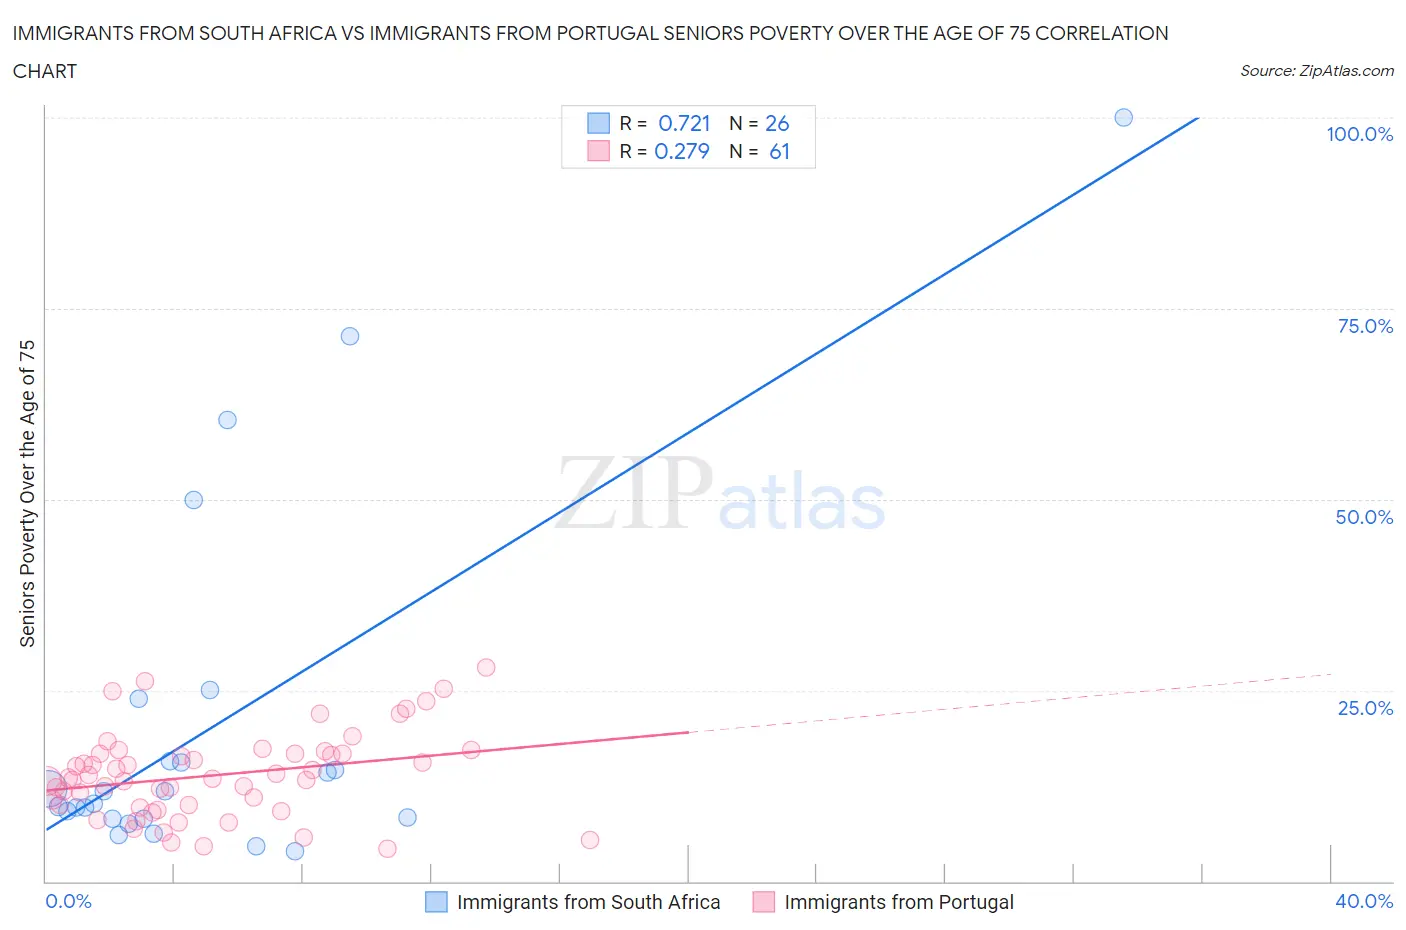 Immigrants from South Africa vs Immigrants from Portugal Seniors Poverty Over the Age of 75